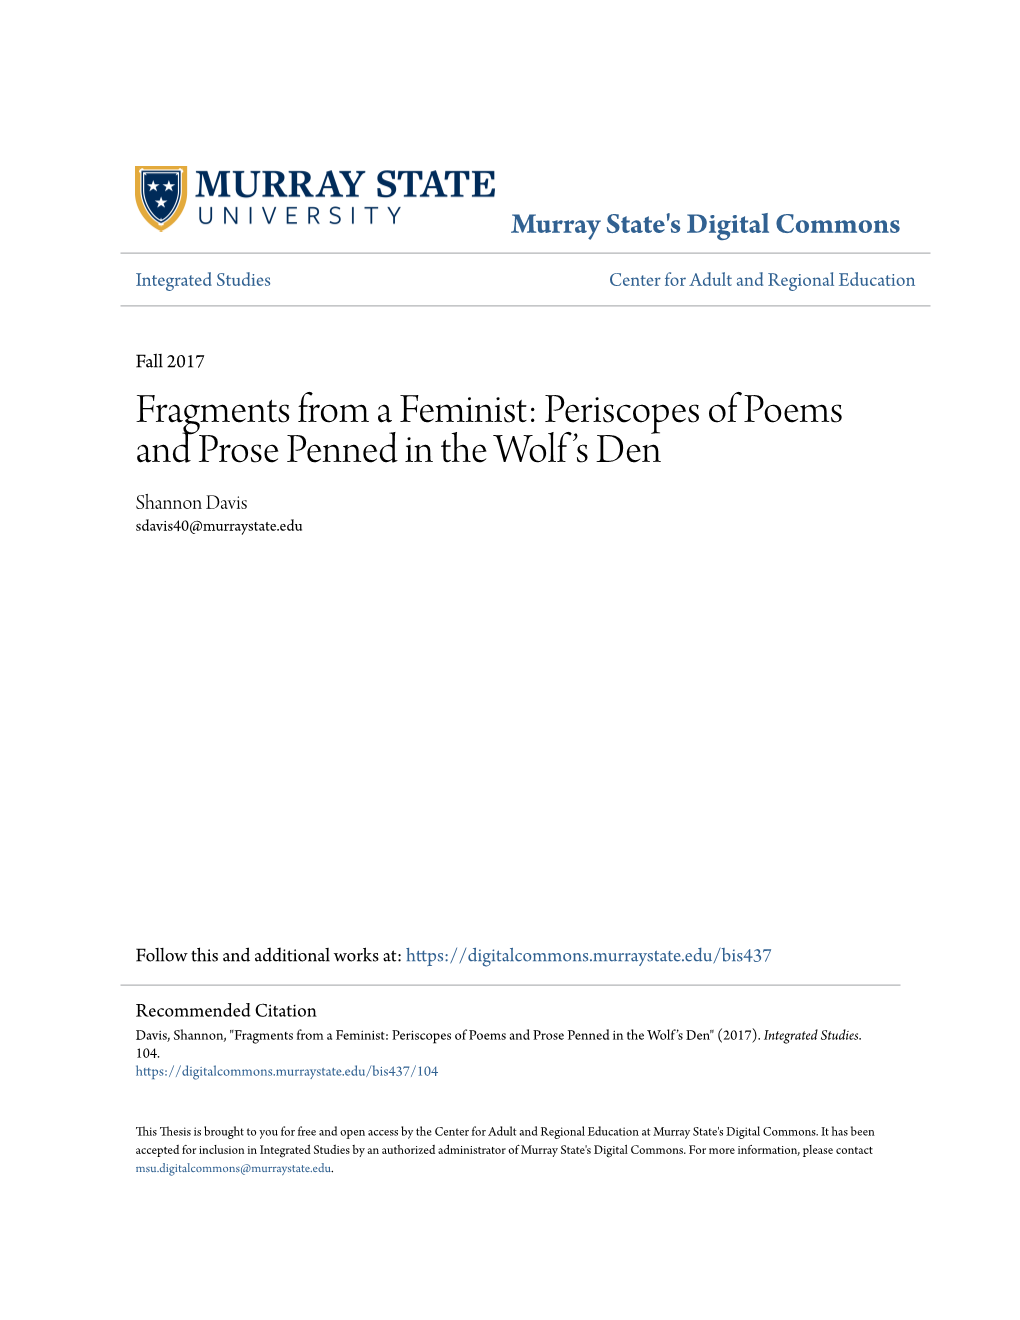 Fragments from a Feminist: Periscopes of Poems and Prose Penned in the Wolfâ•Žs